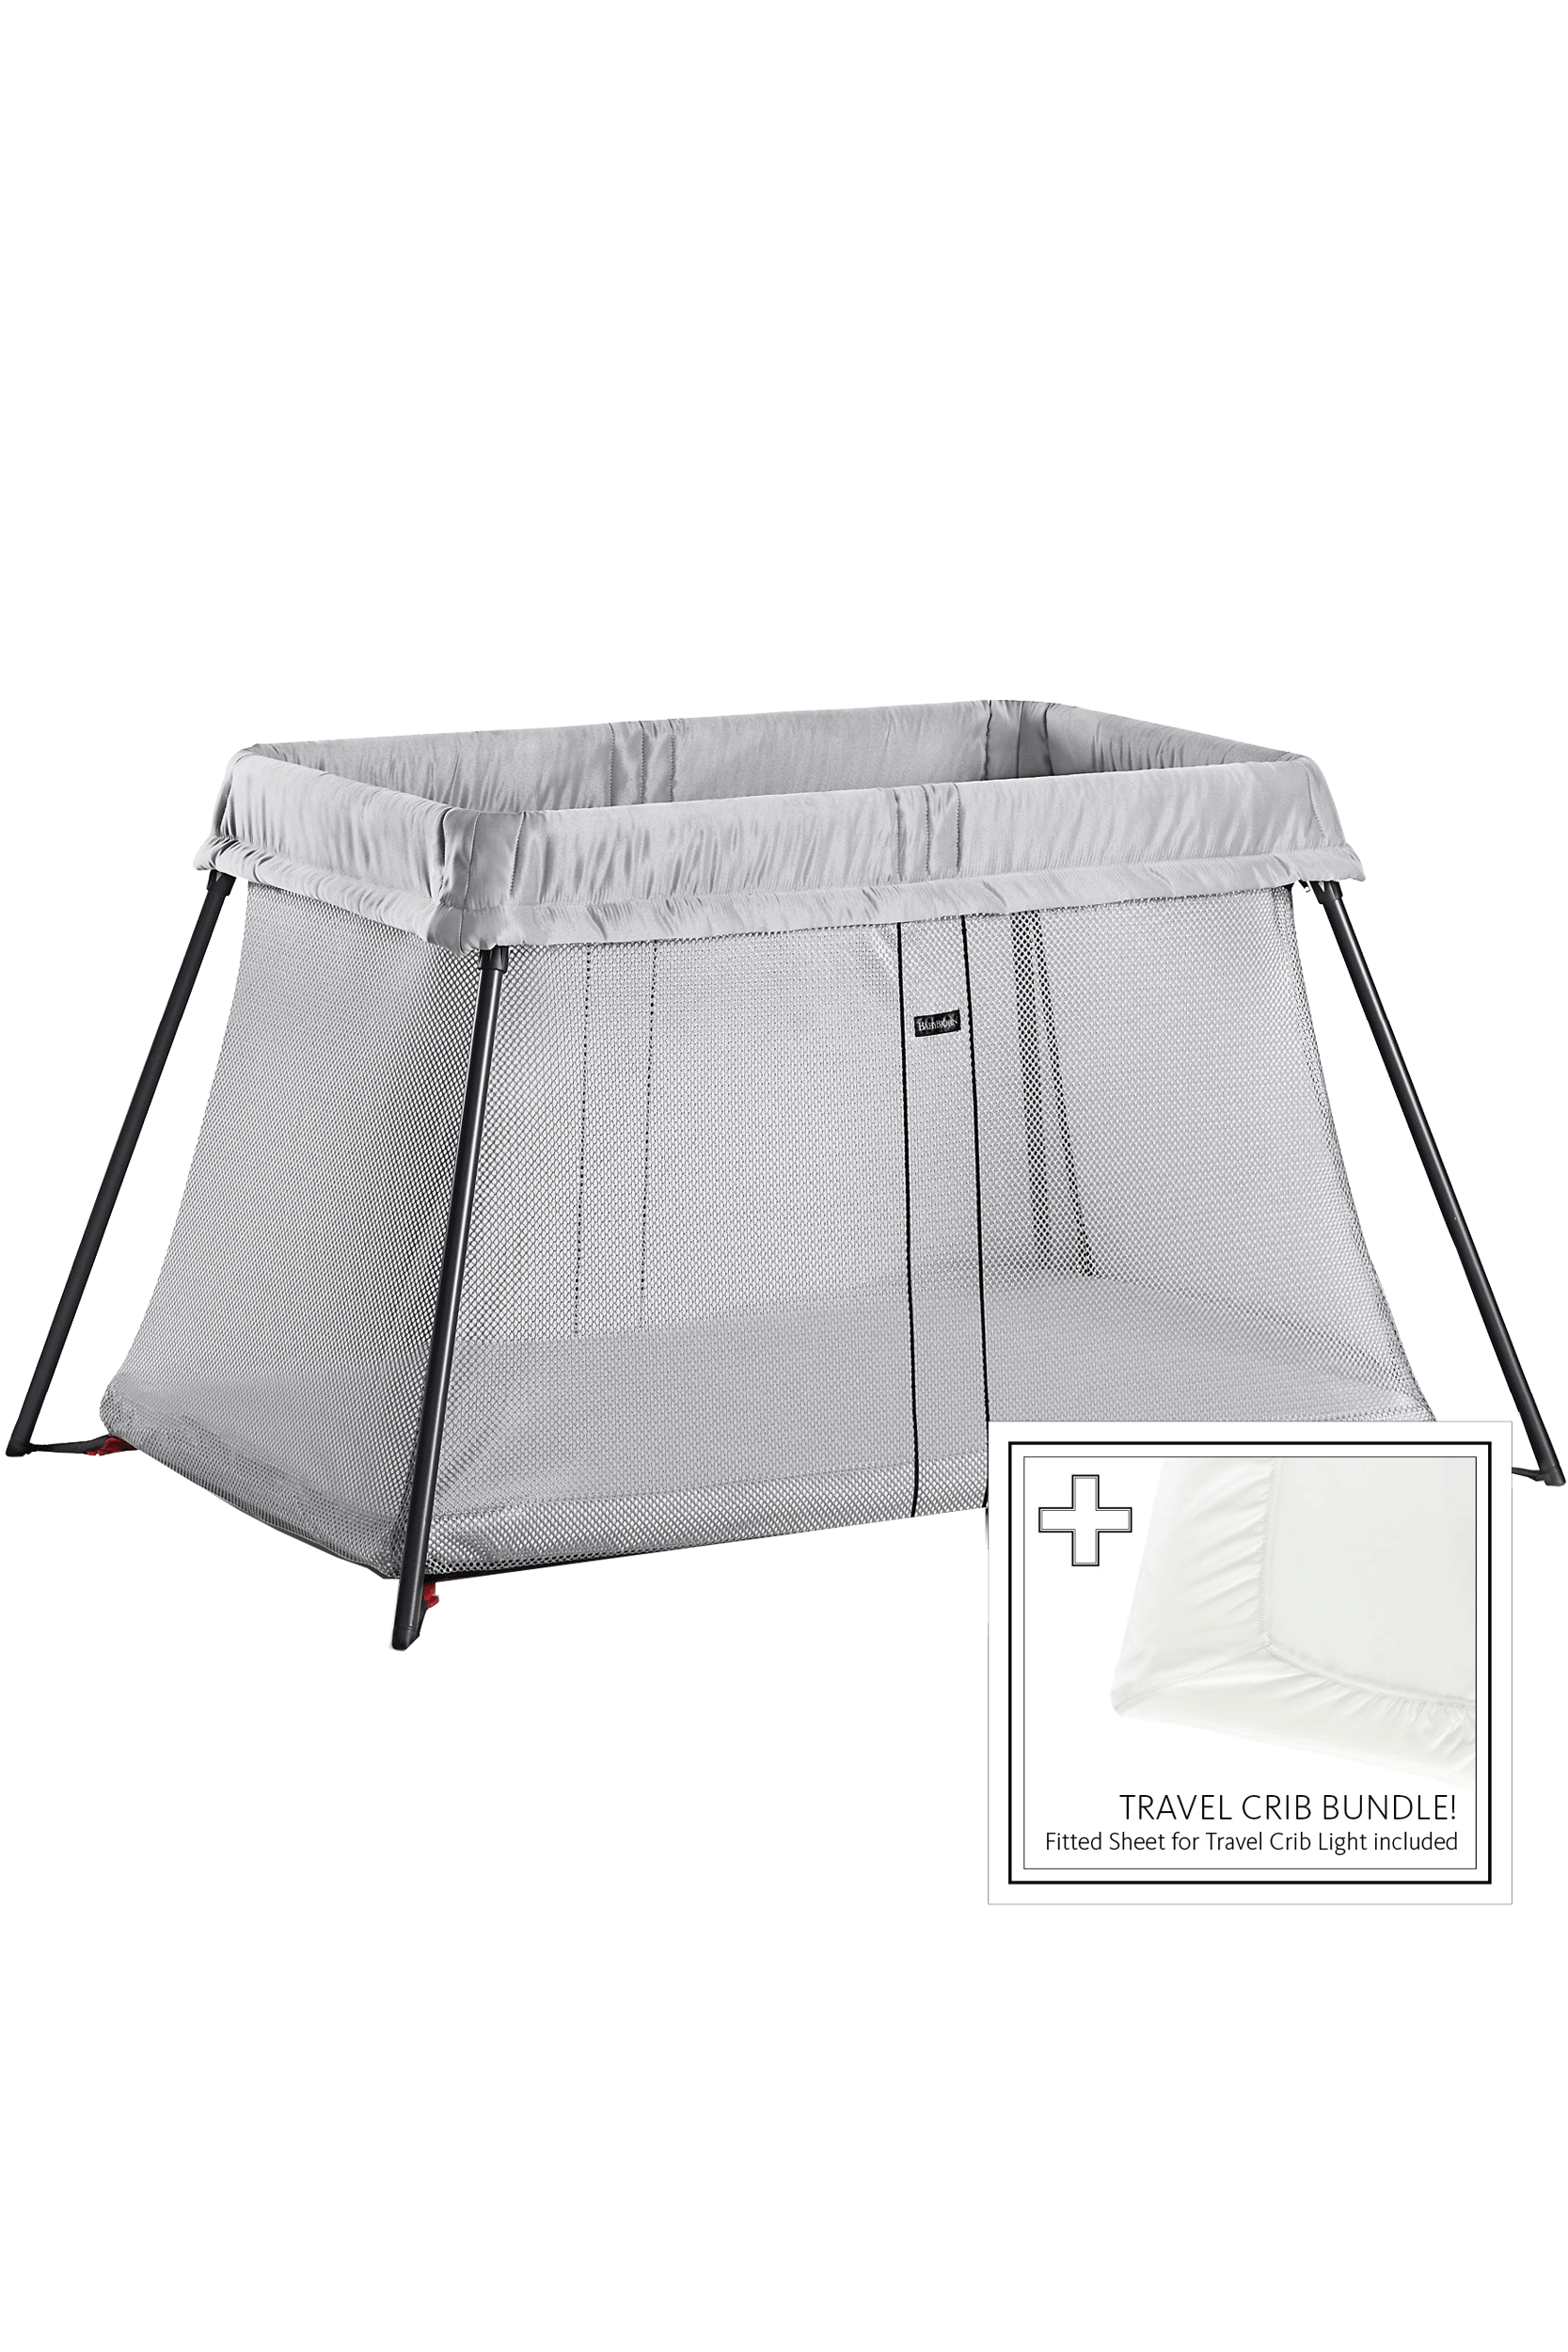 BabyBjorn Travel Crib Light in Silver with Fitted Sheet